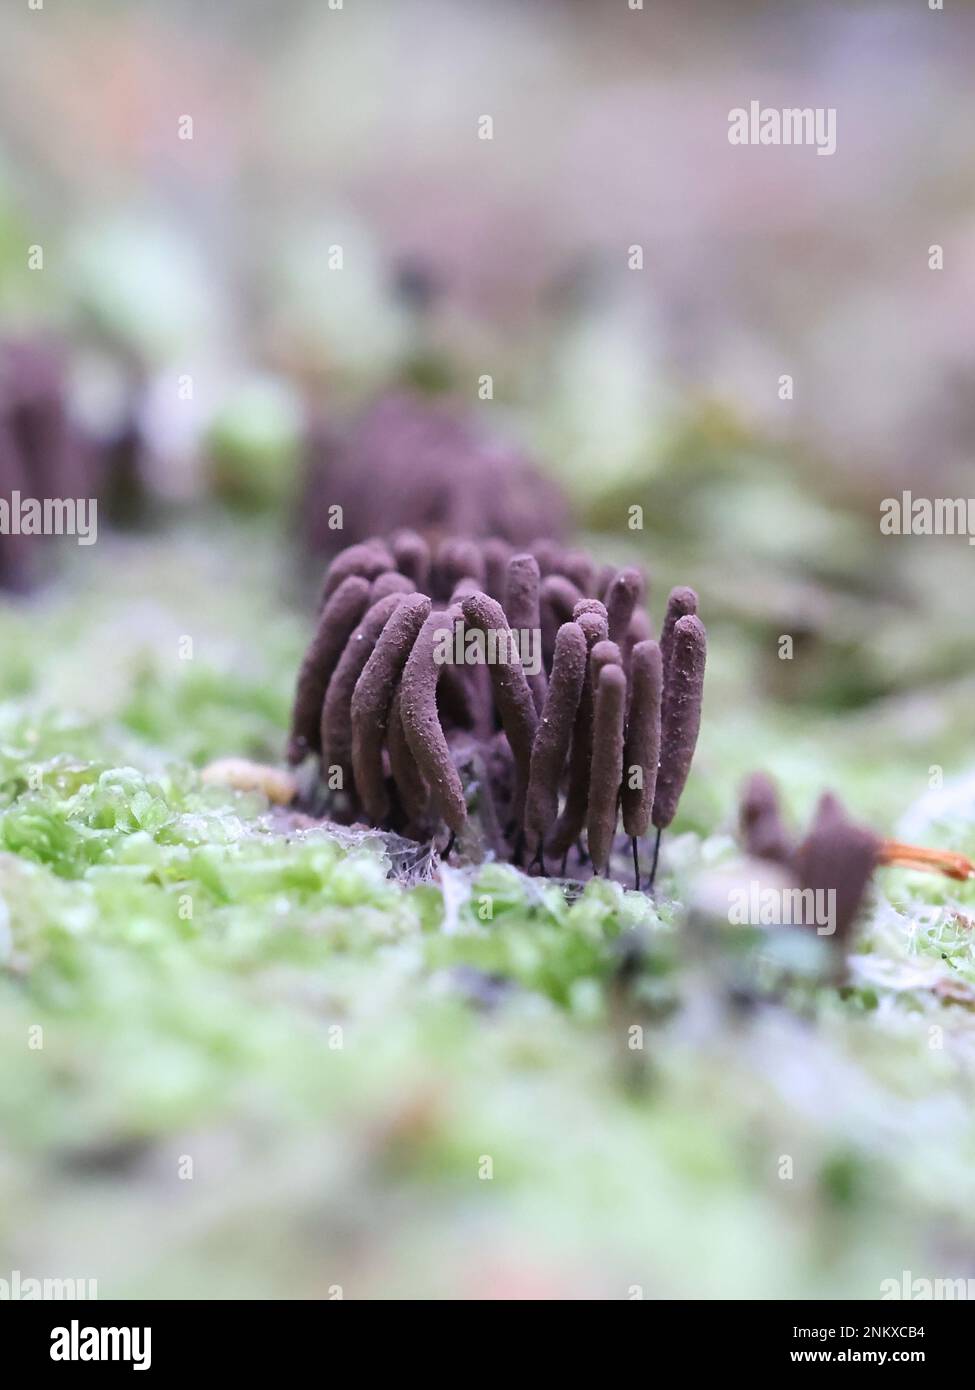 Stemonitis virginiensis, a slime mold from Finland, no common English name Stock Photo